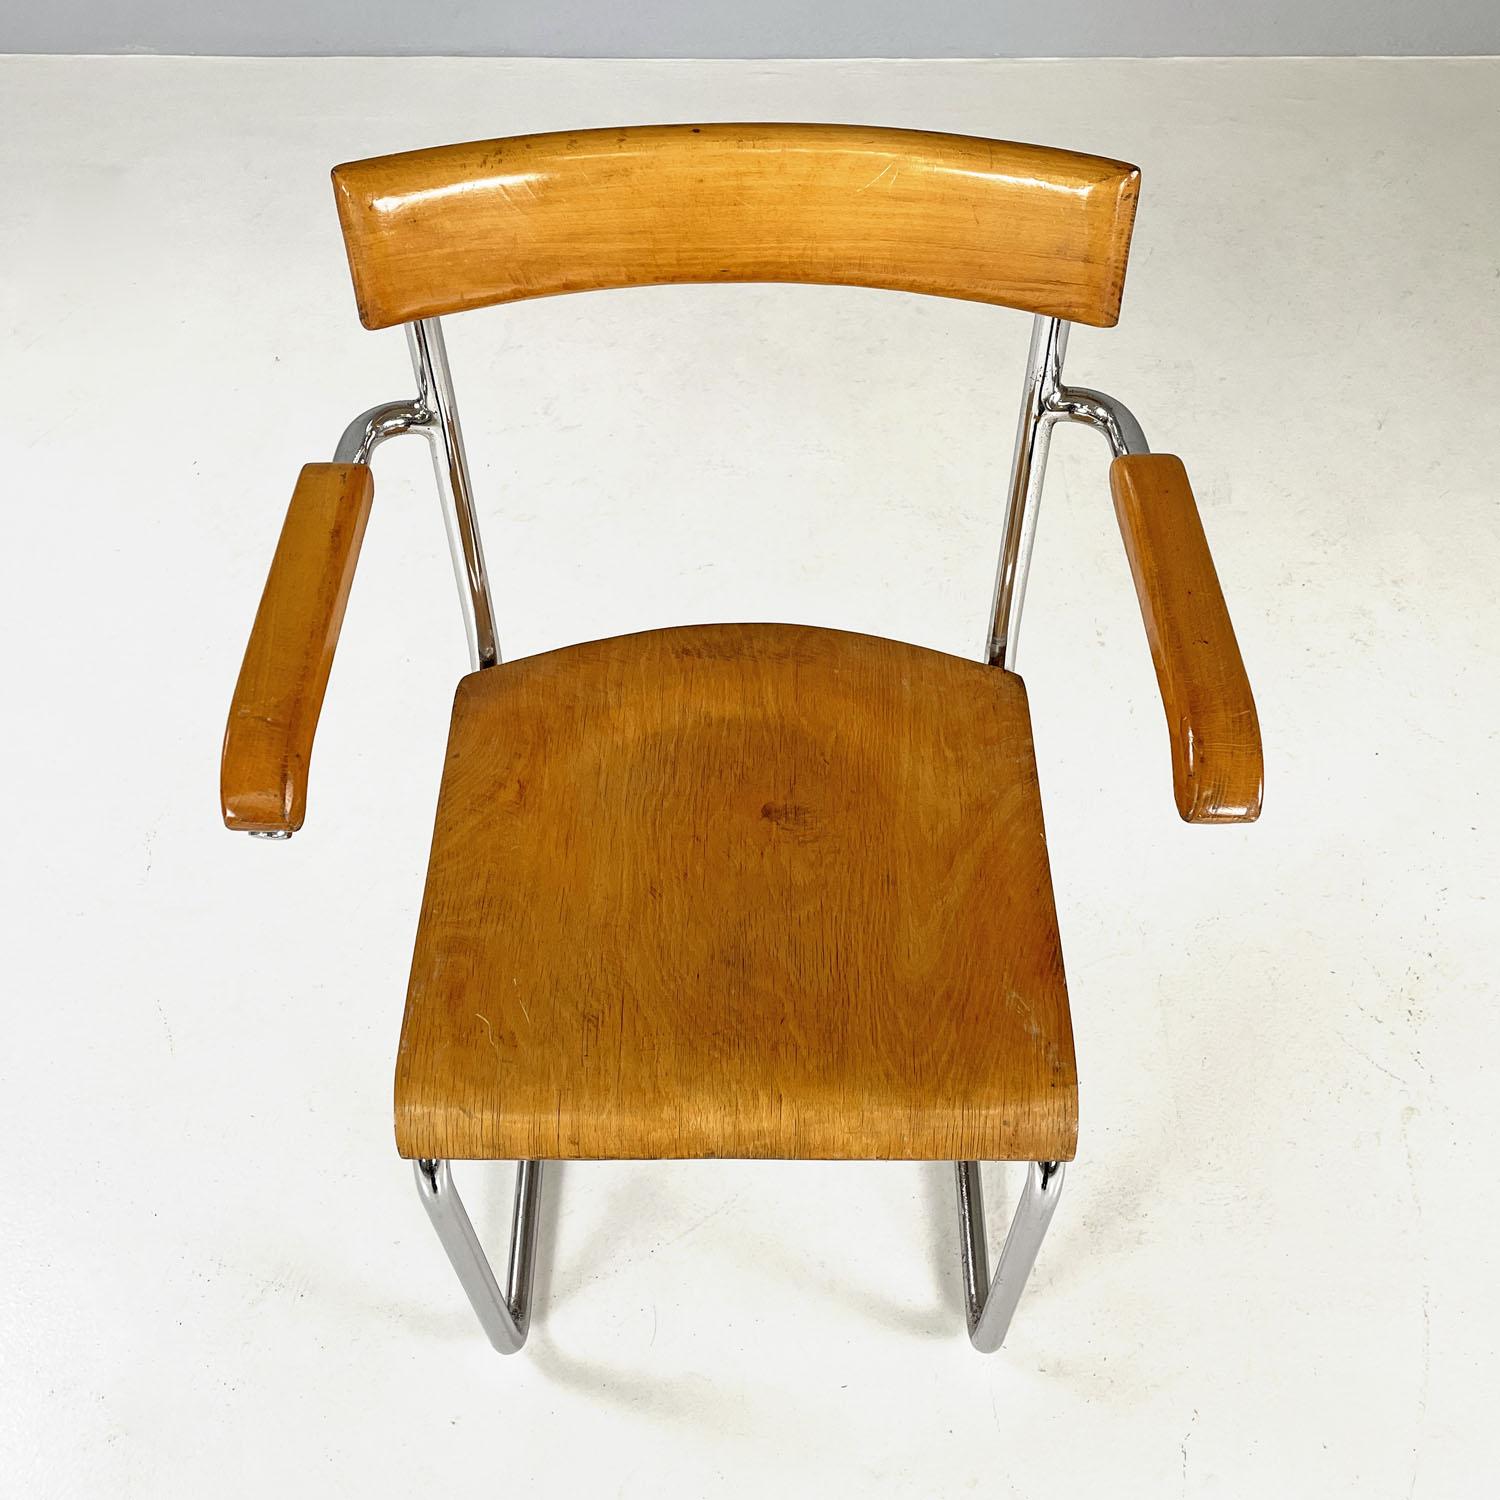 Steel Czech Art Deco wood and chromed steel chair with armrests by Ladislav Zak, 1930s For Sale